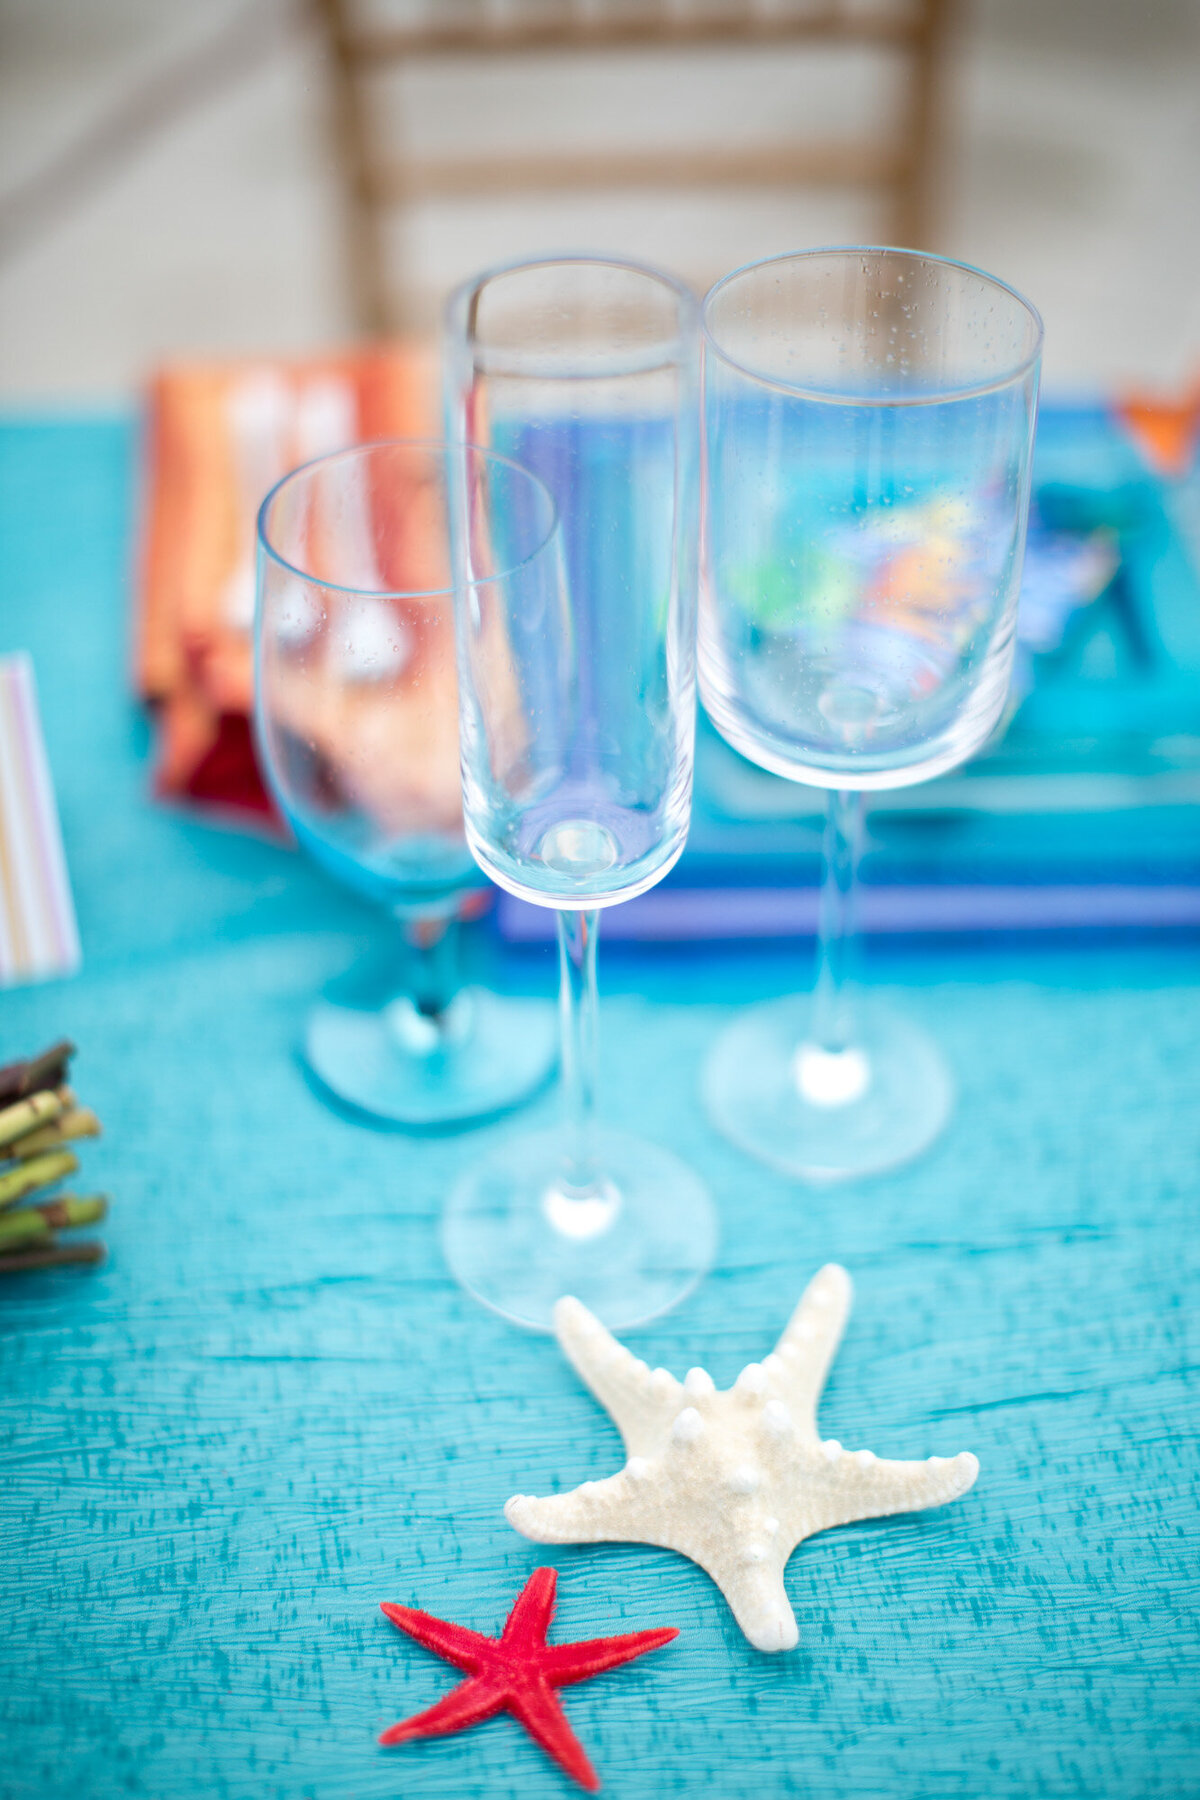 White and pink starfish and three glasses on top of the table